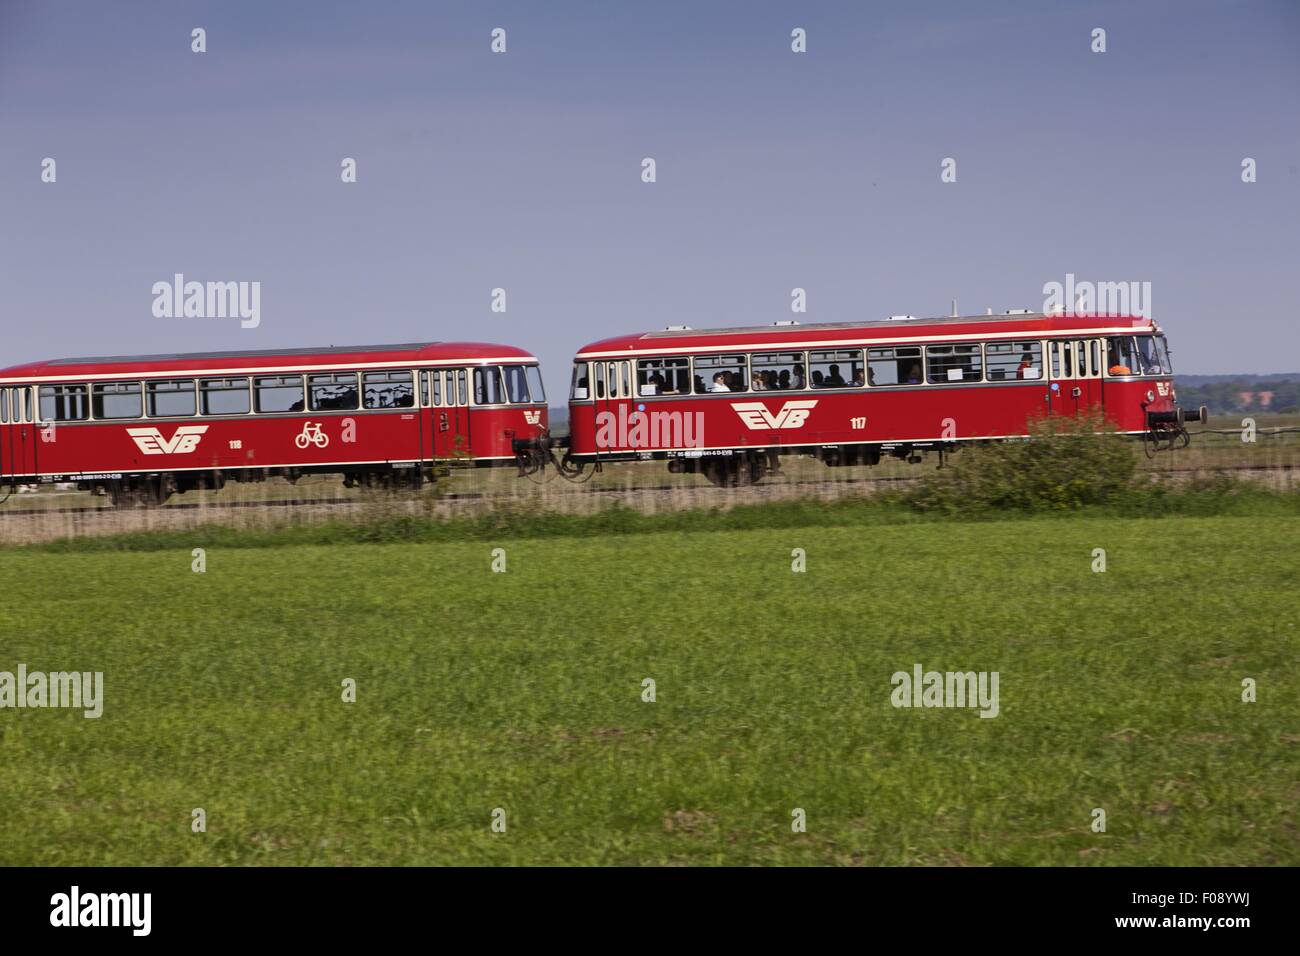 People travelling in Moor Express, Worpswede, Lower Saxony, Germany Stock Photo